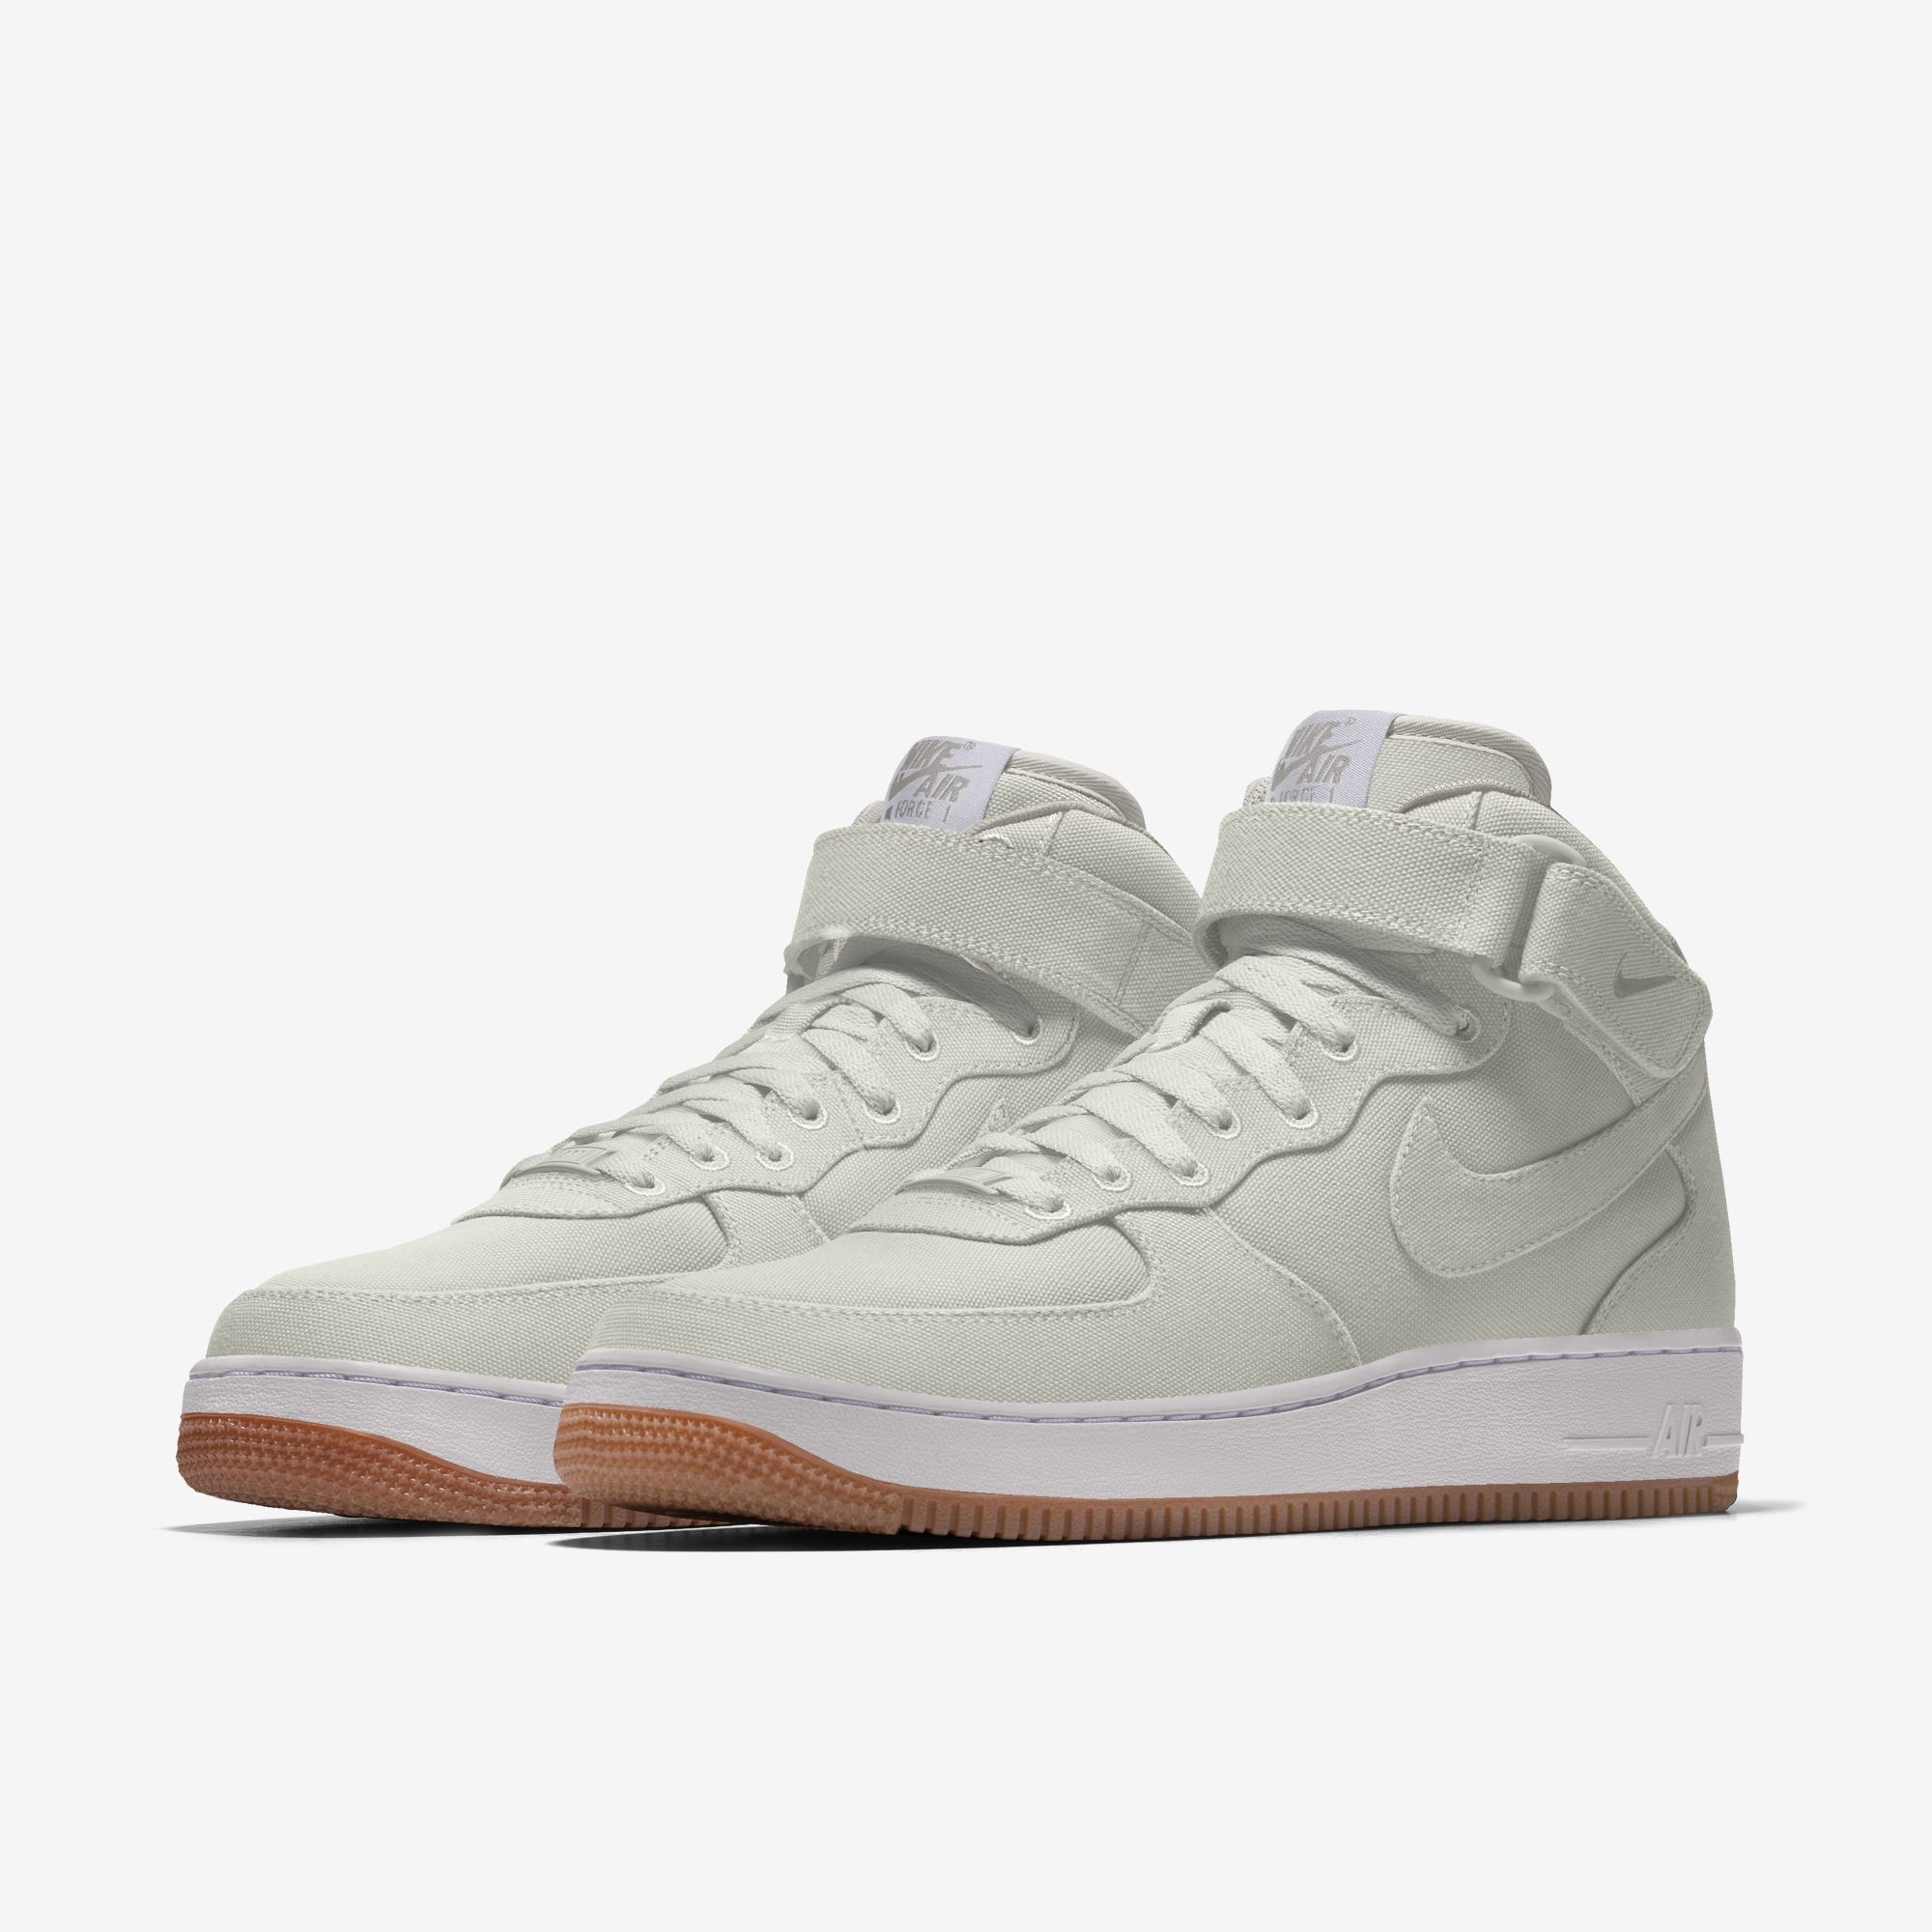  Nike Air Force 1 Mid By You - Light Bone Canvas 